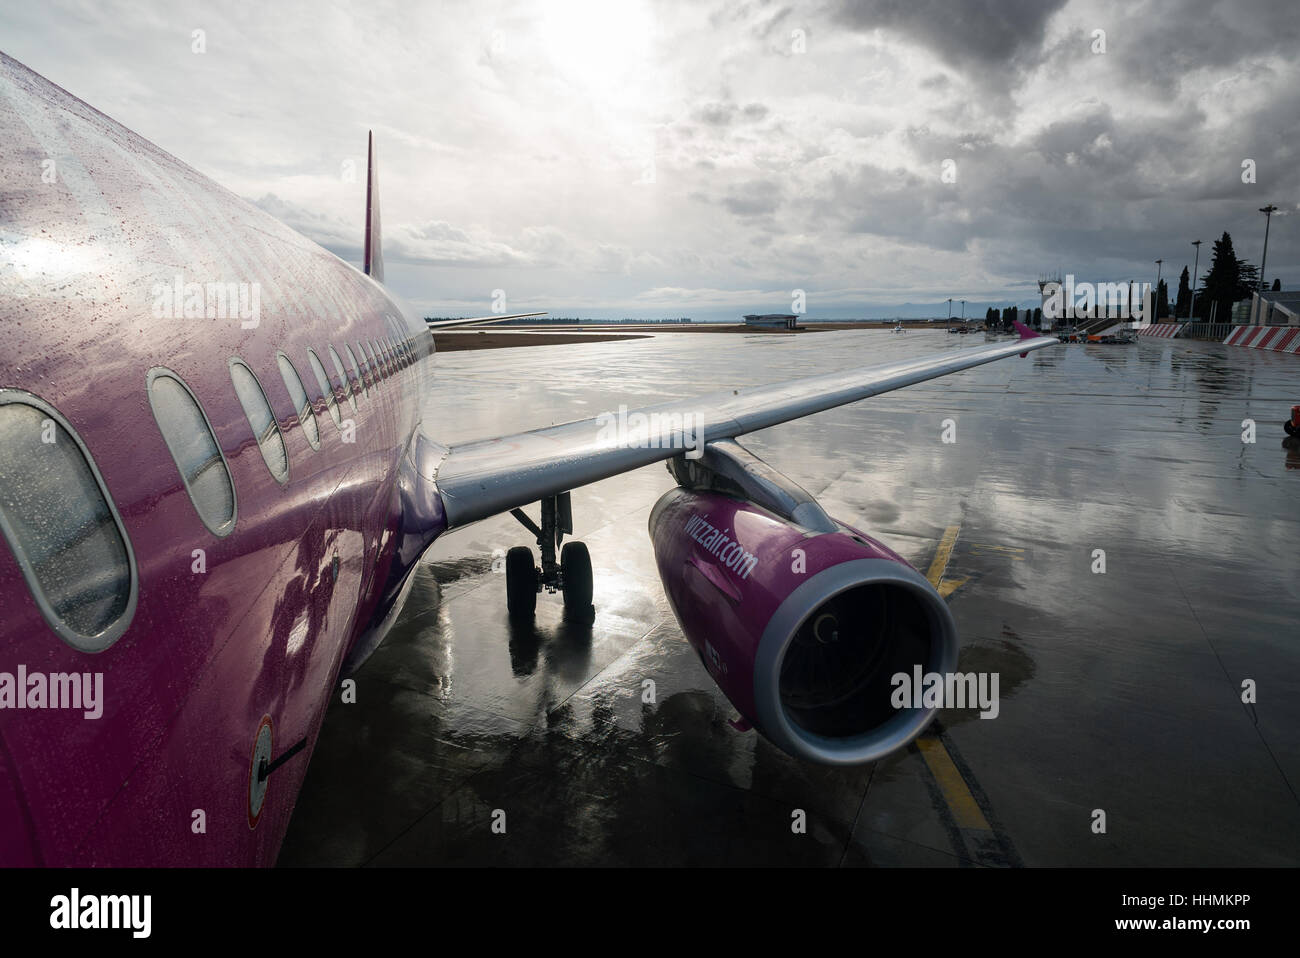 boarding a Wizz Air Airbus A320 on a flight from Podgorica on a wet day Stock Photo